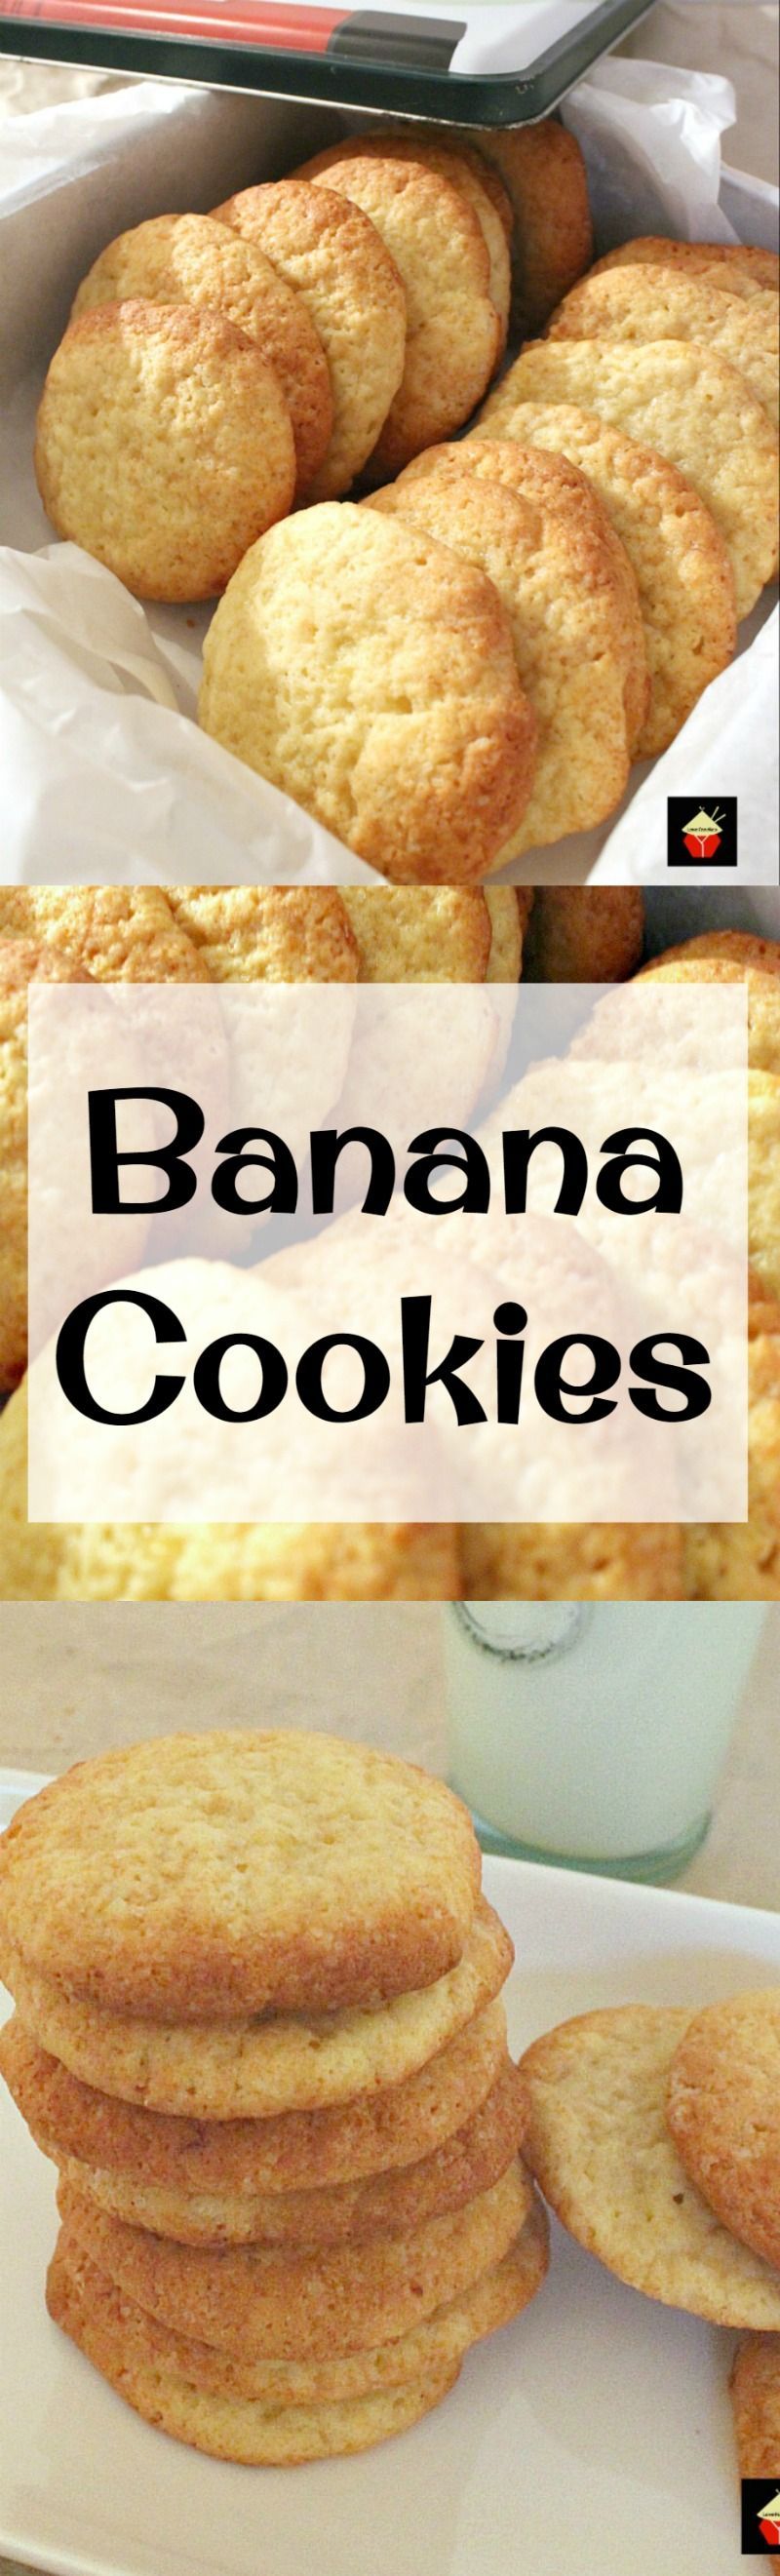 Banana Drop Cookies. Theses are a light fluffy cookie and great for using up those overripe bananas! Easy recipe too!